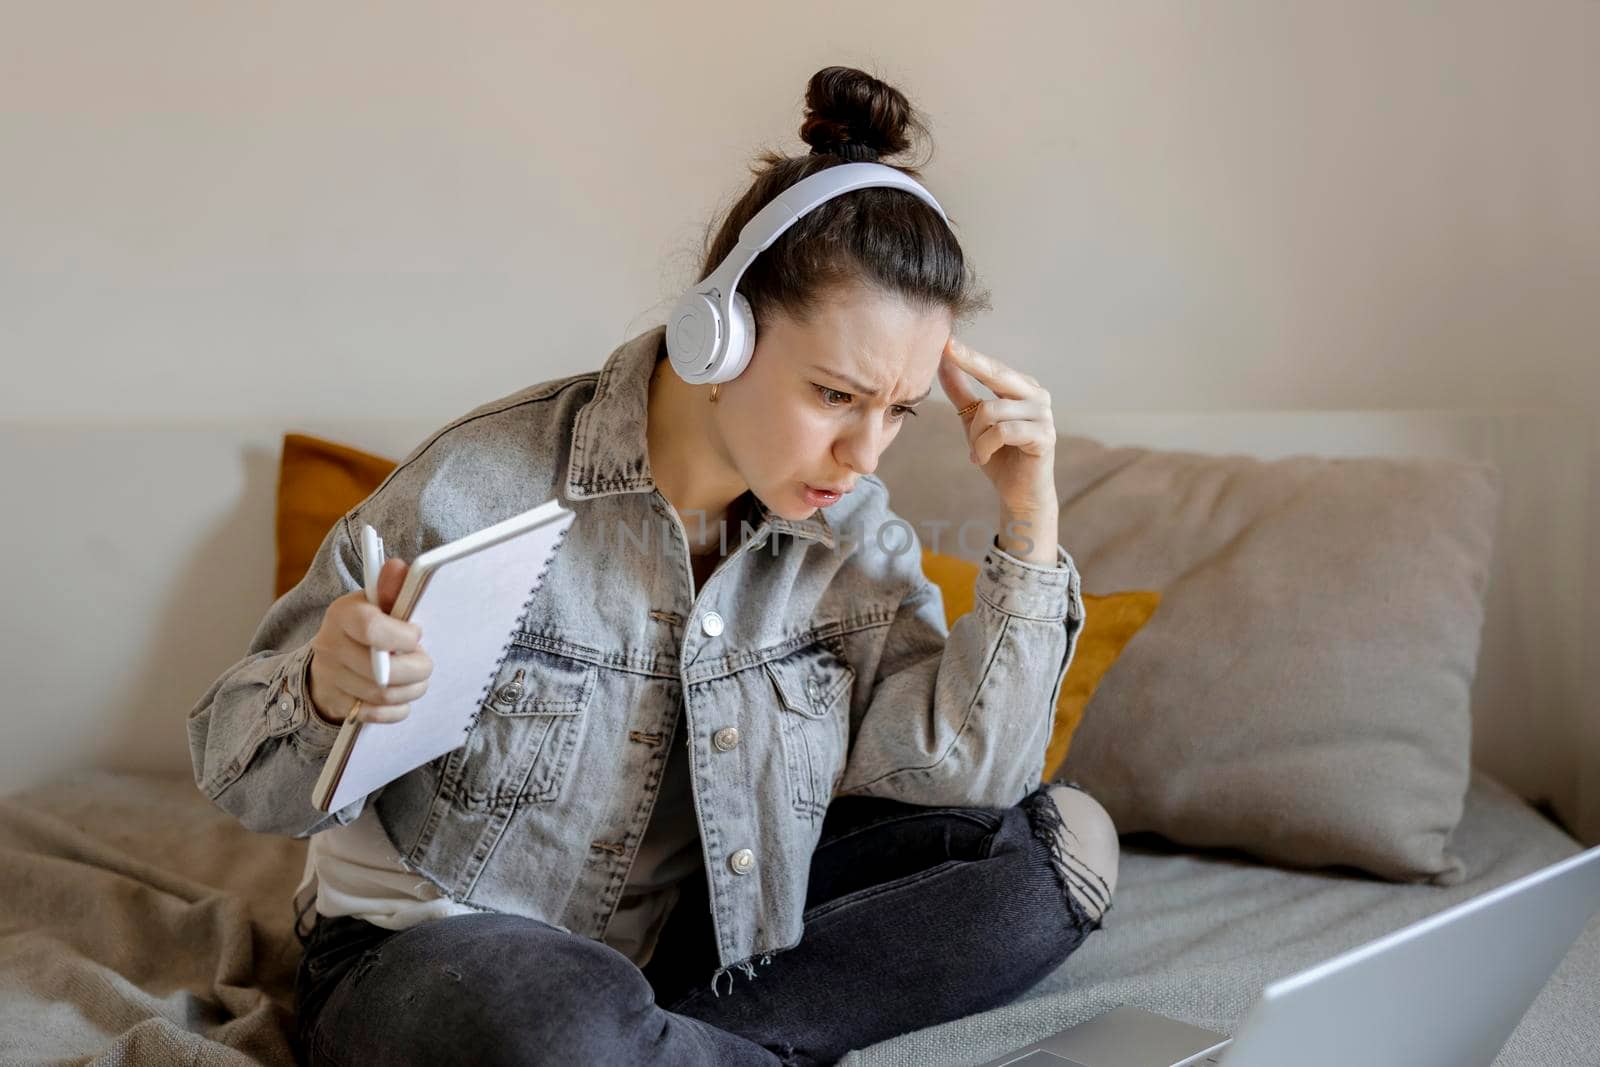 Angry and dissatisfied woman with casual clothes sitting on bed at home with computer and studying. Girl is sad and tired. Negative emotions, stress, mental problems, deadline. Distance education